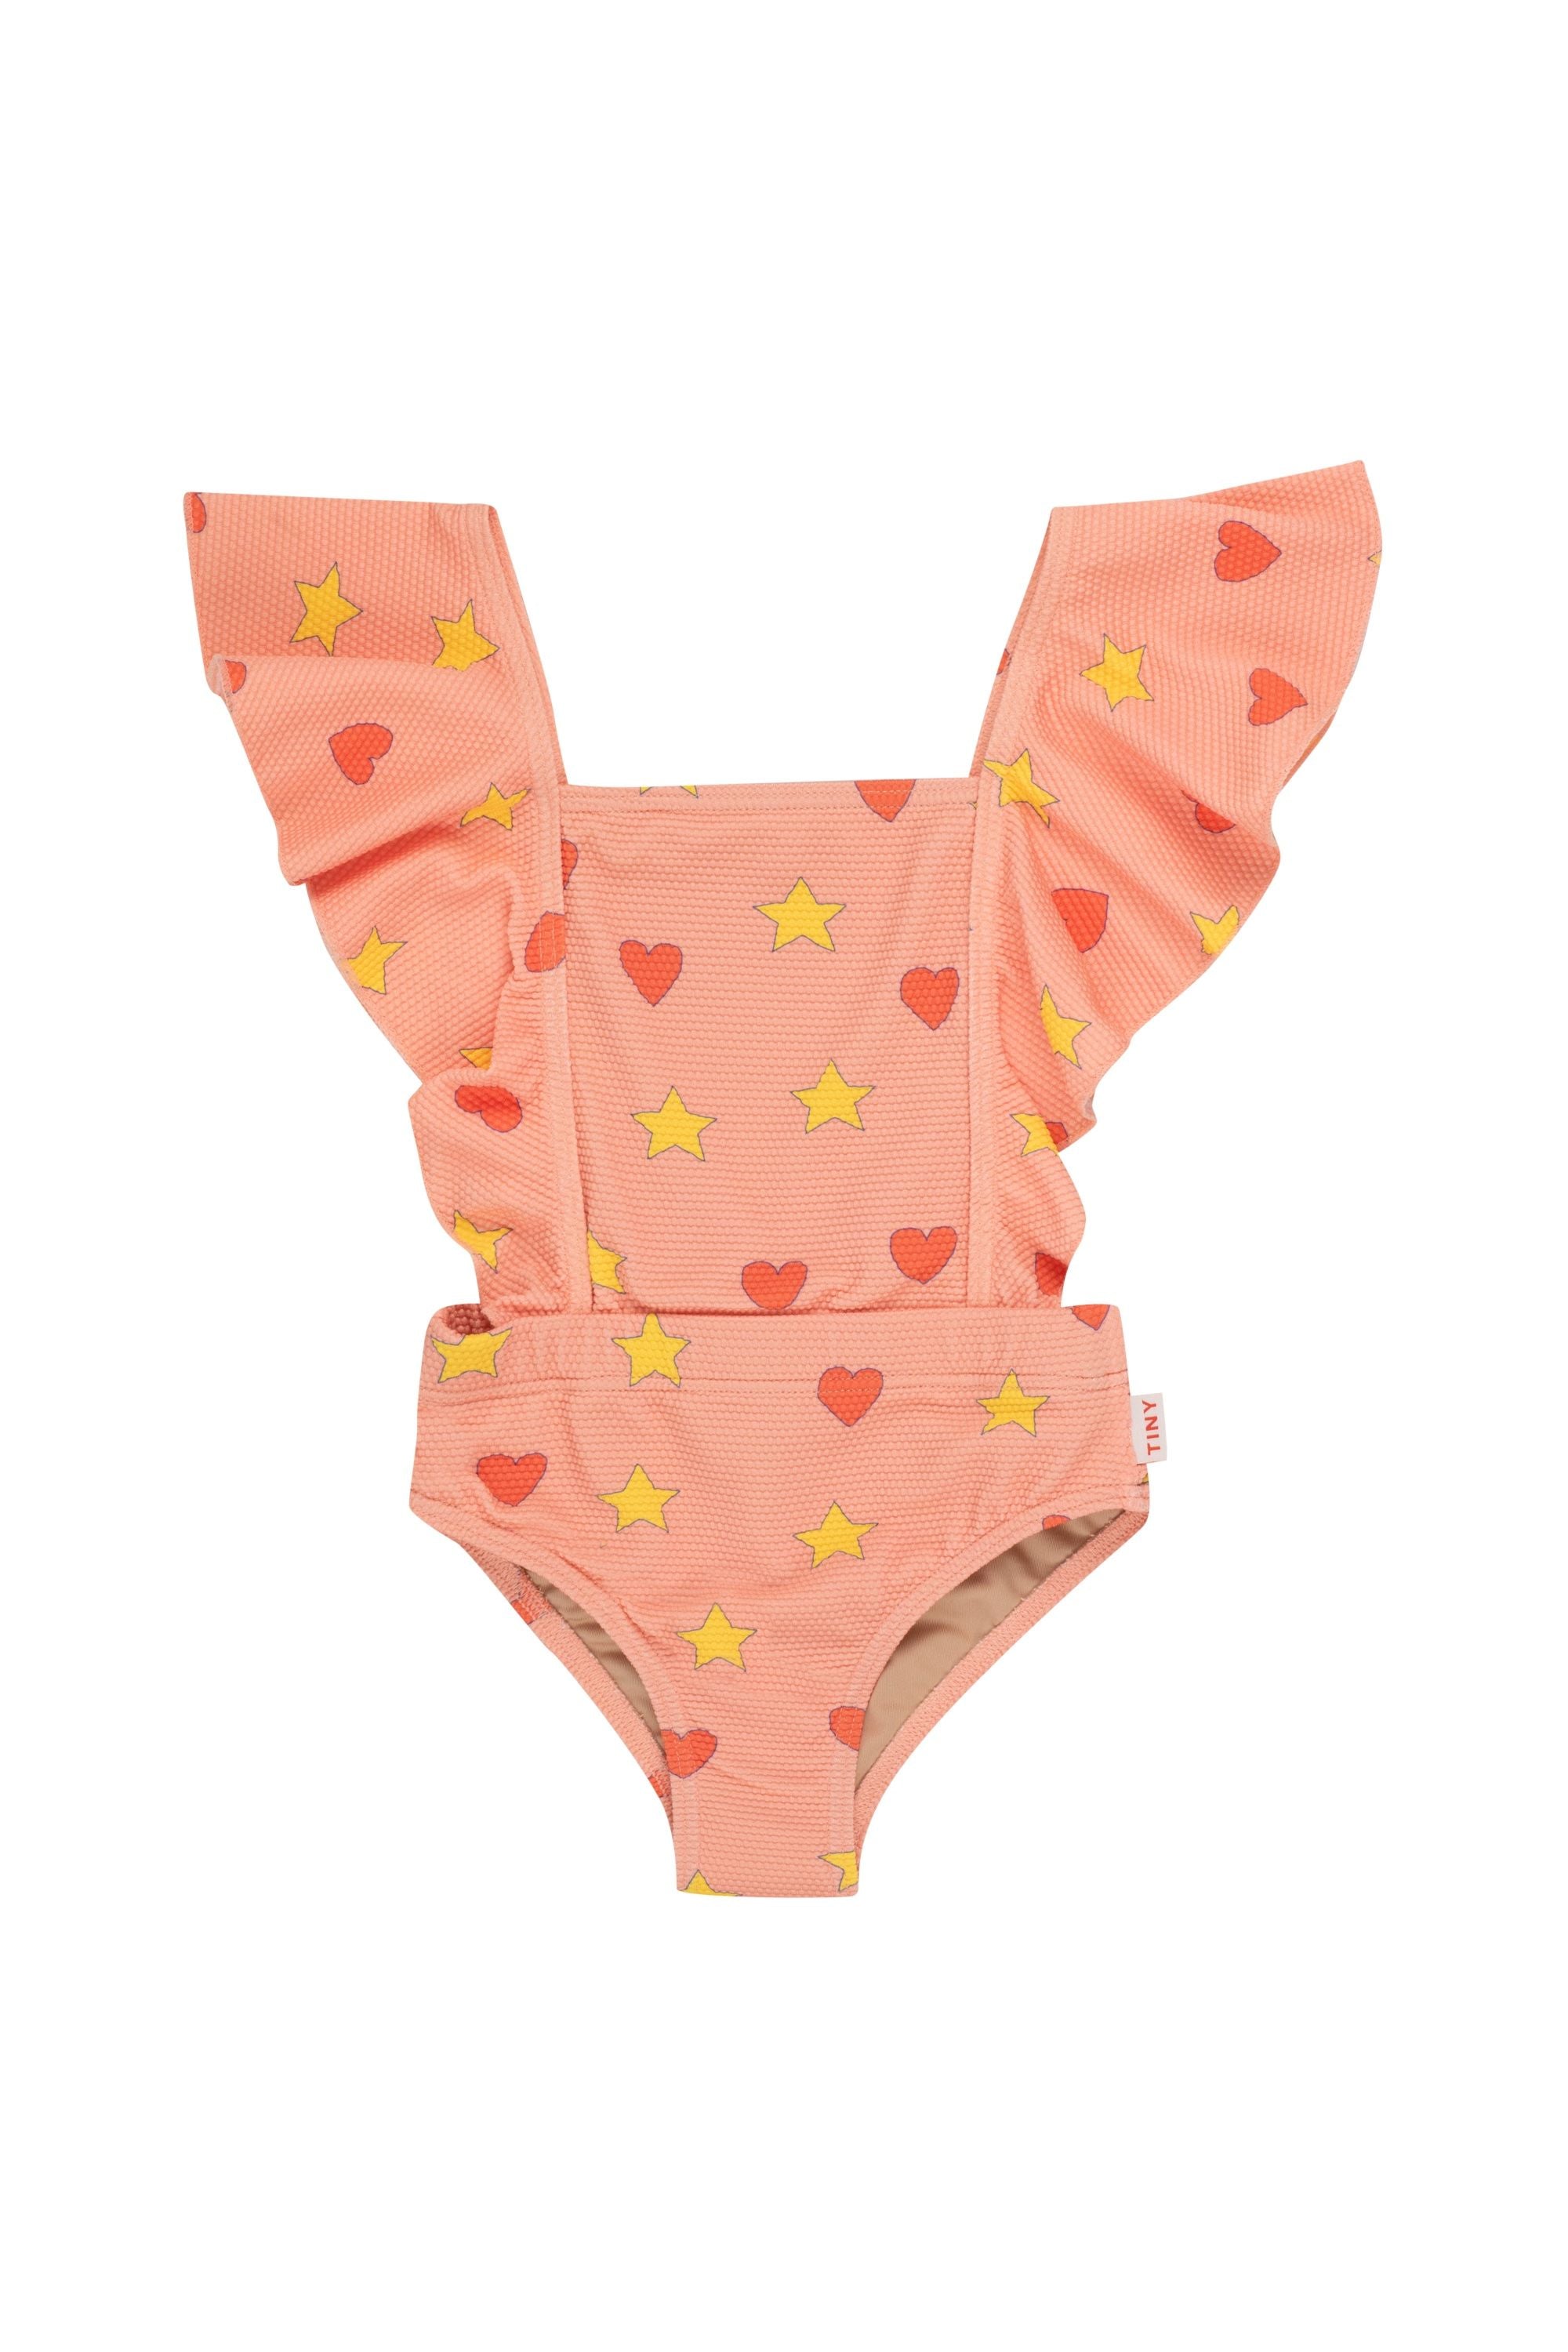 Tiny Cottons - Star Hearts Swimsuit